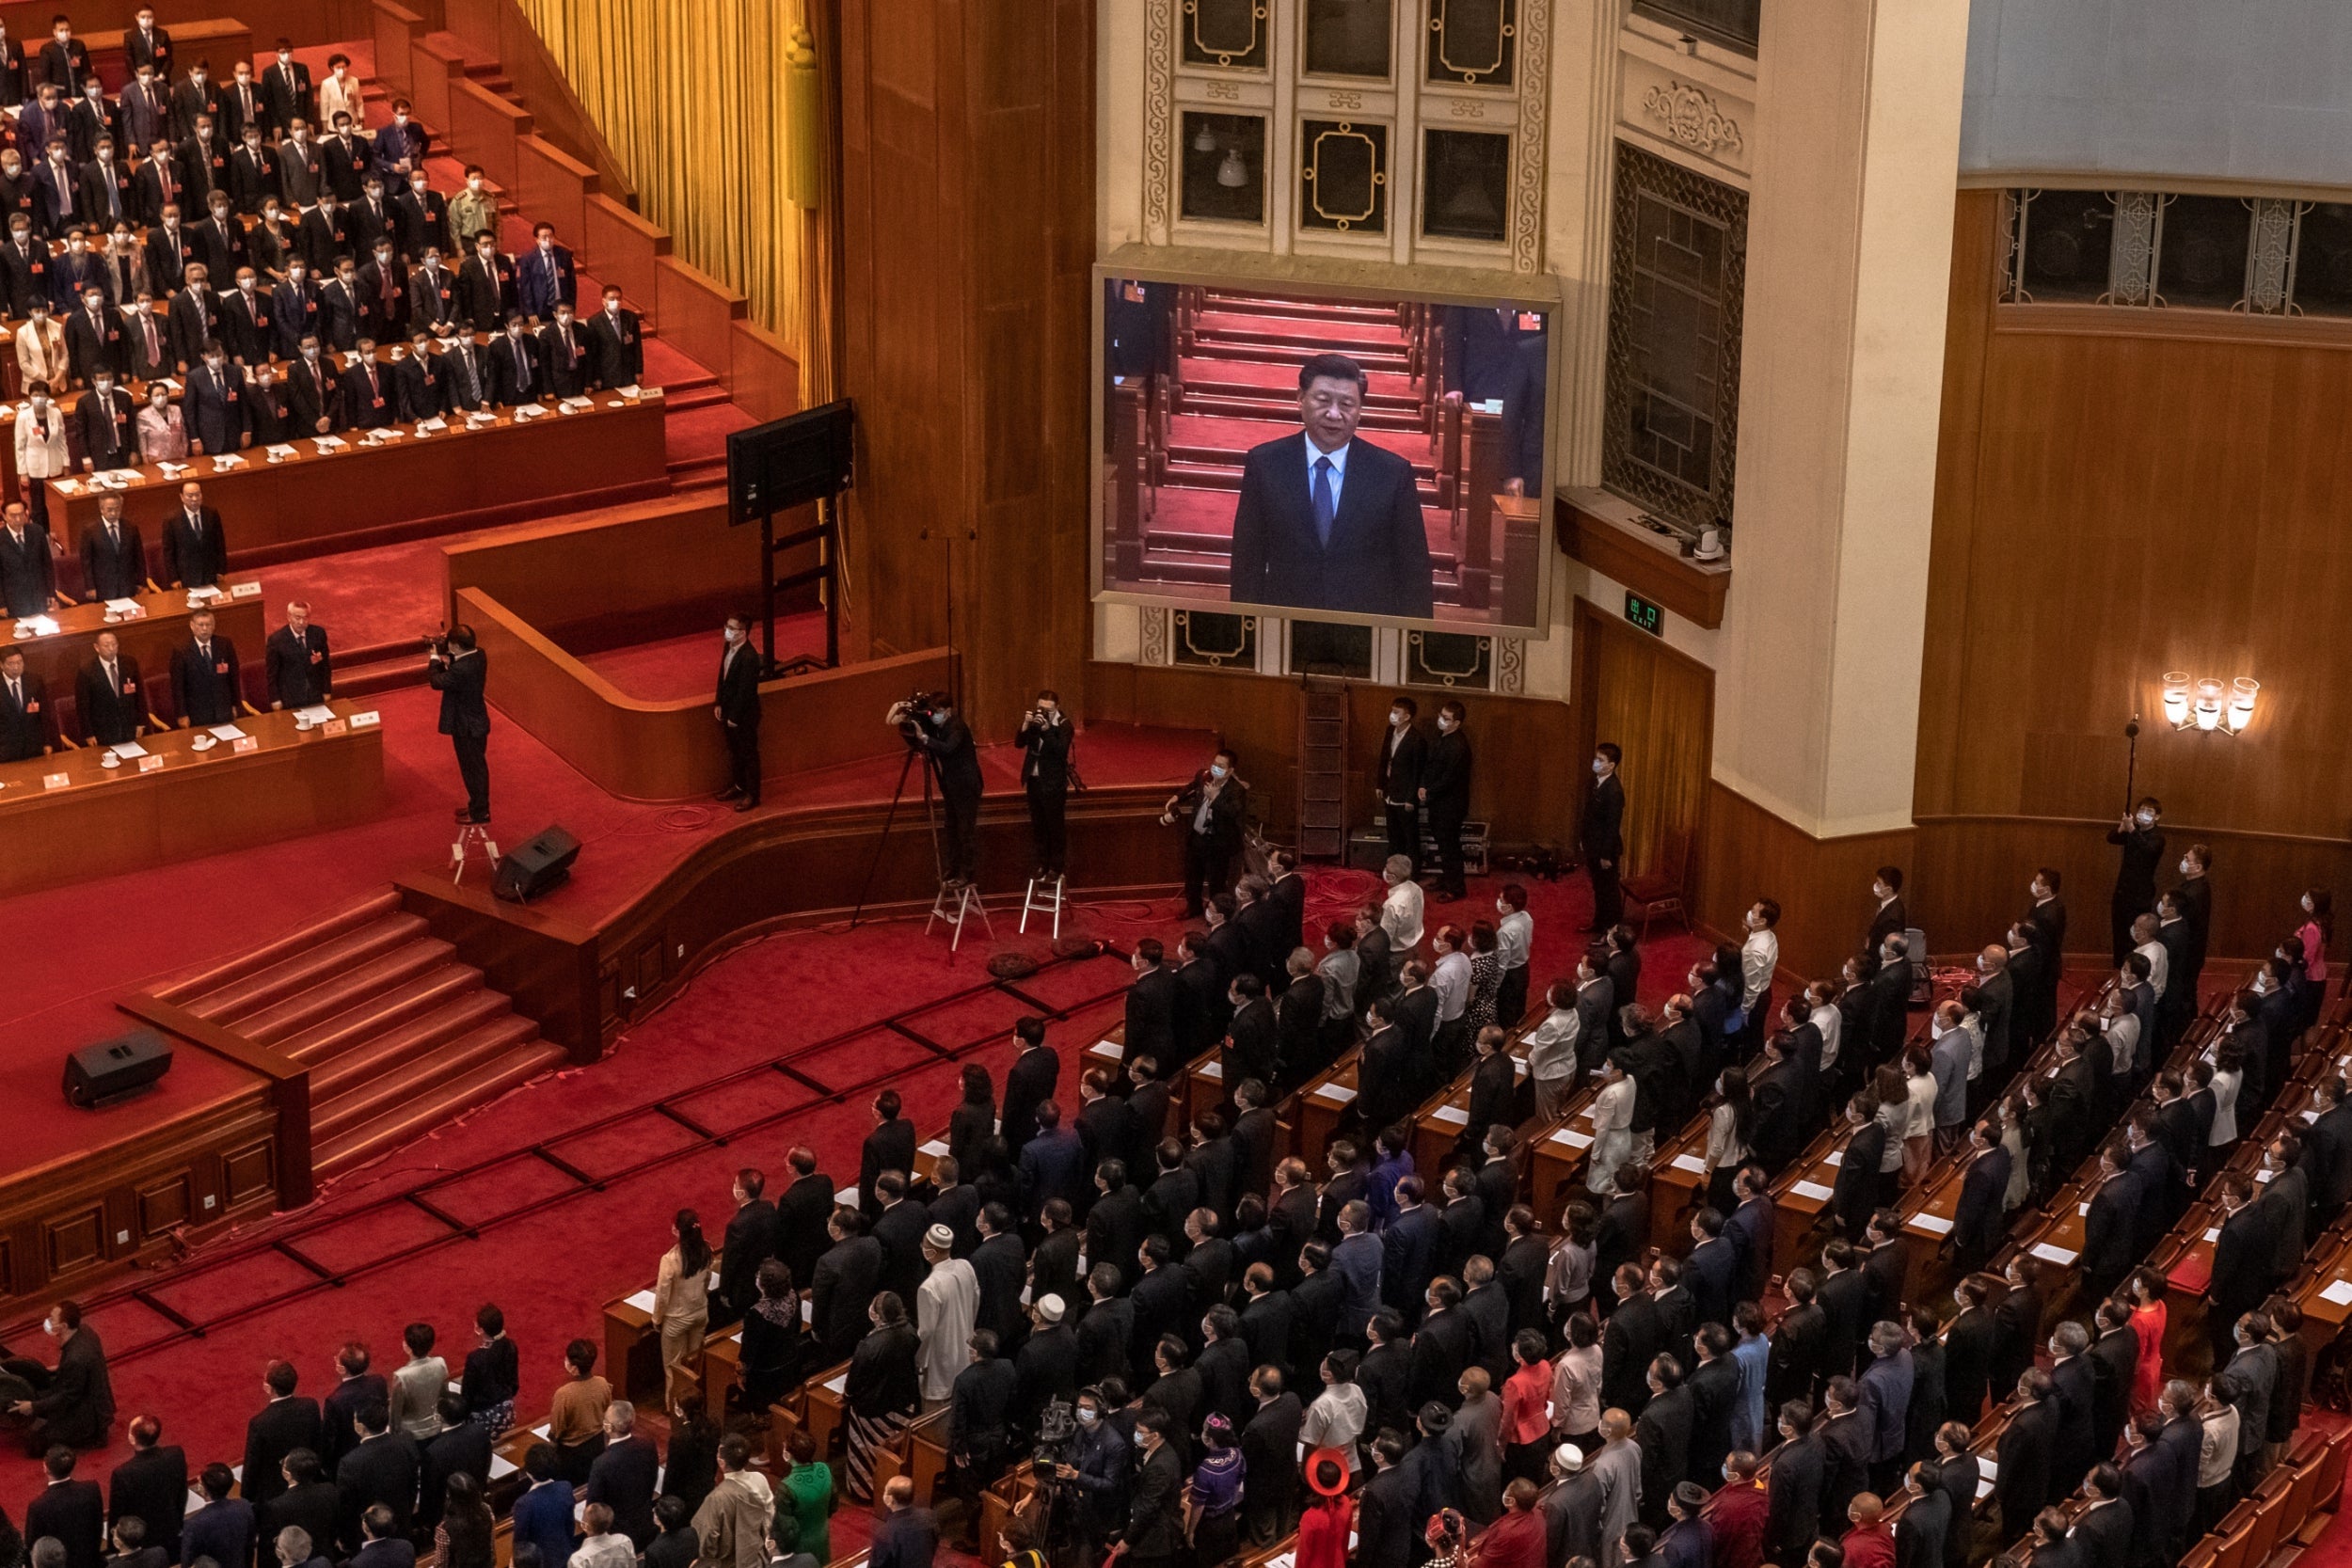 Delegates stand in front of a screen depicting Chinese president Xi Jinping during the closing session of the Chinese parliament at the Great Hall of the People, in Beijing, on Thursday